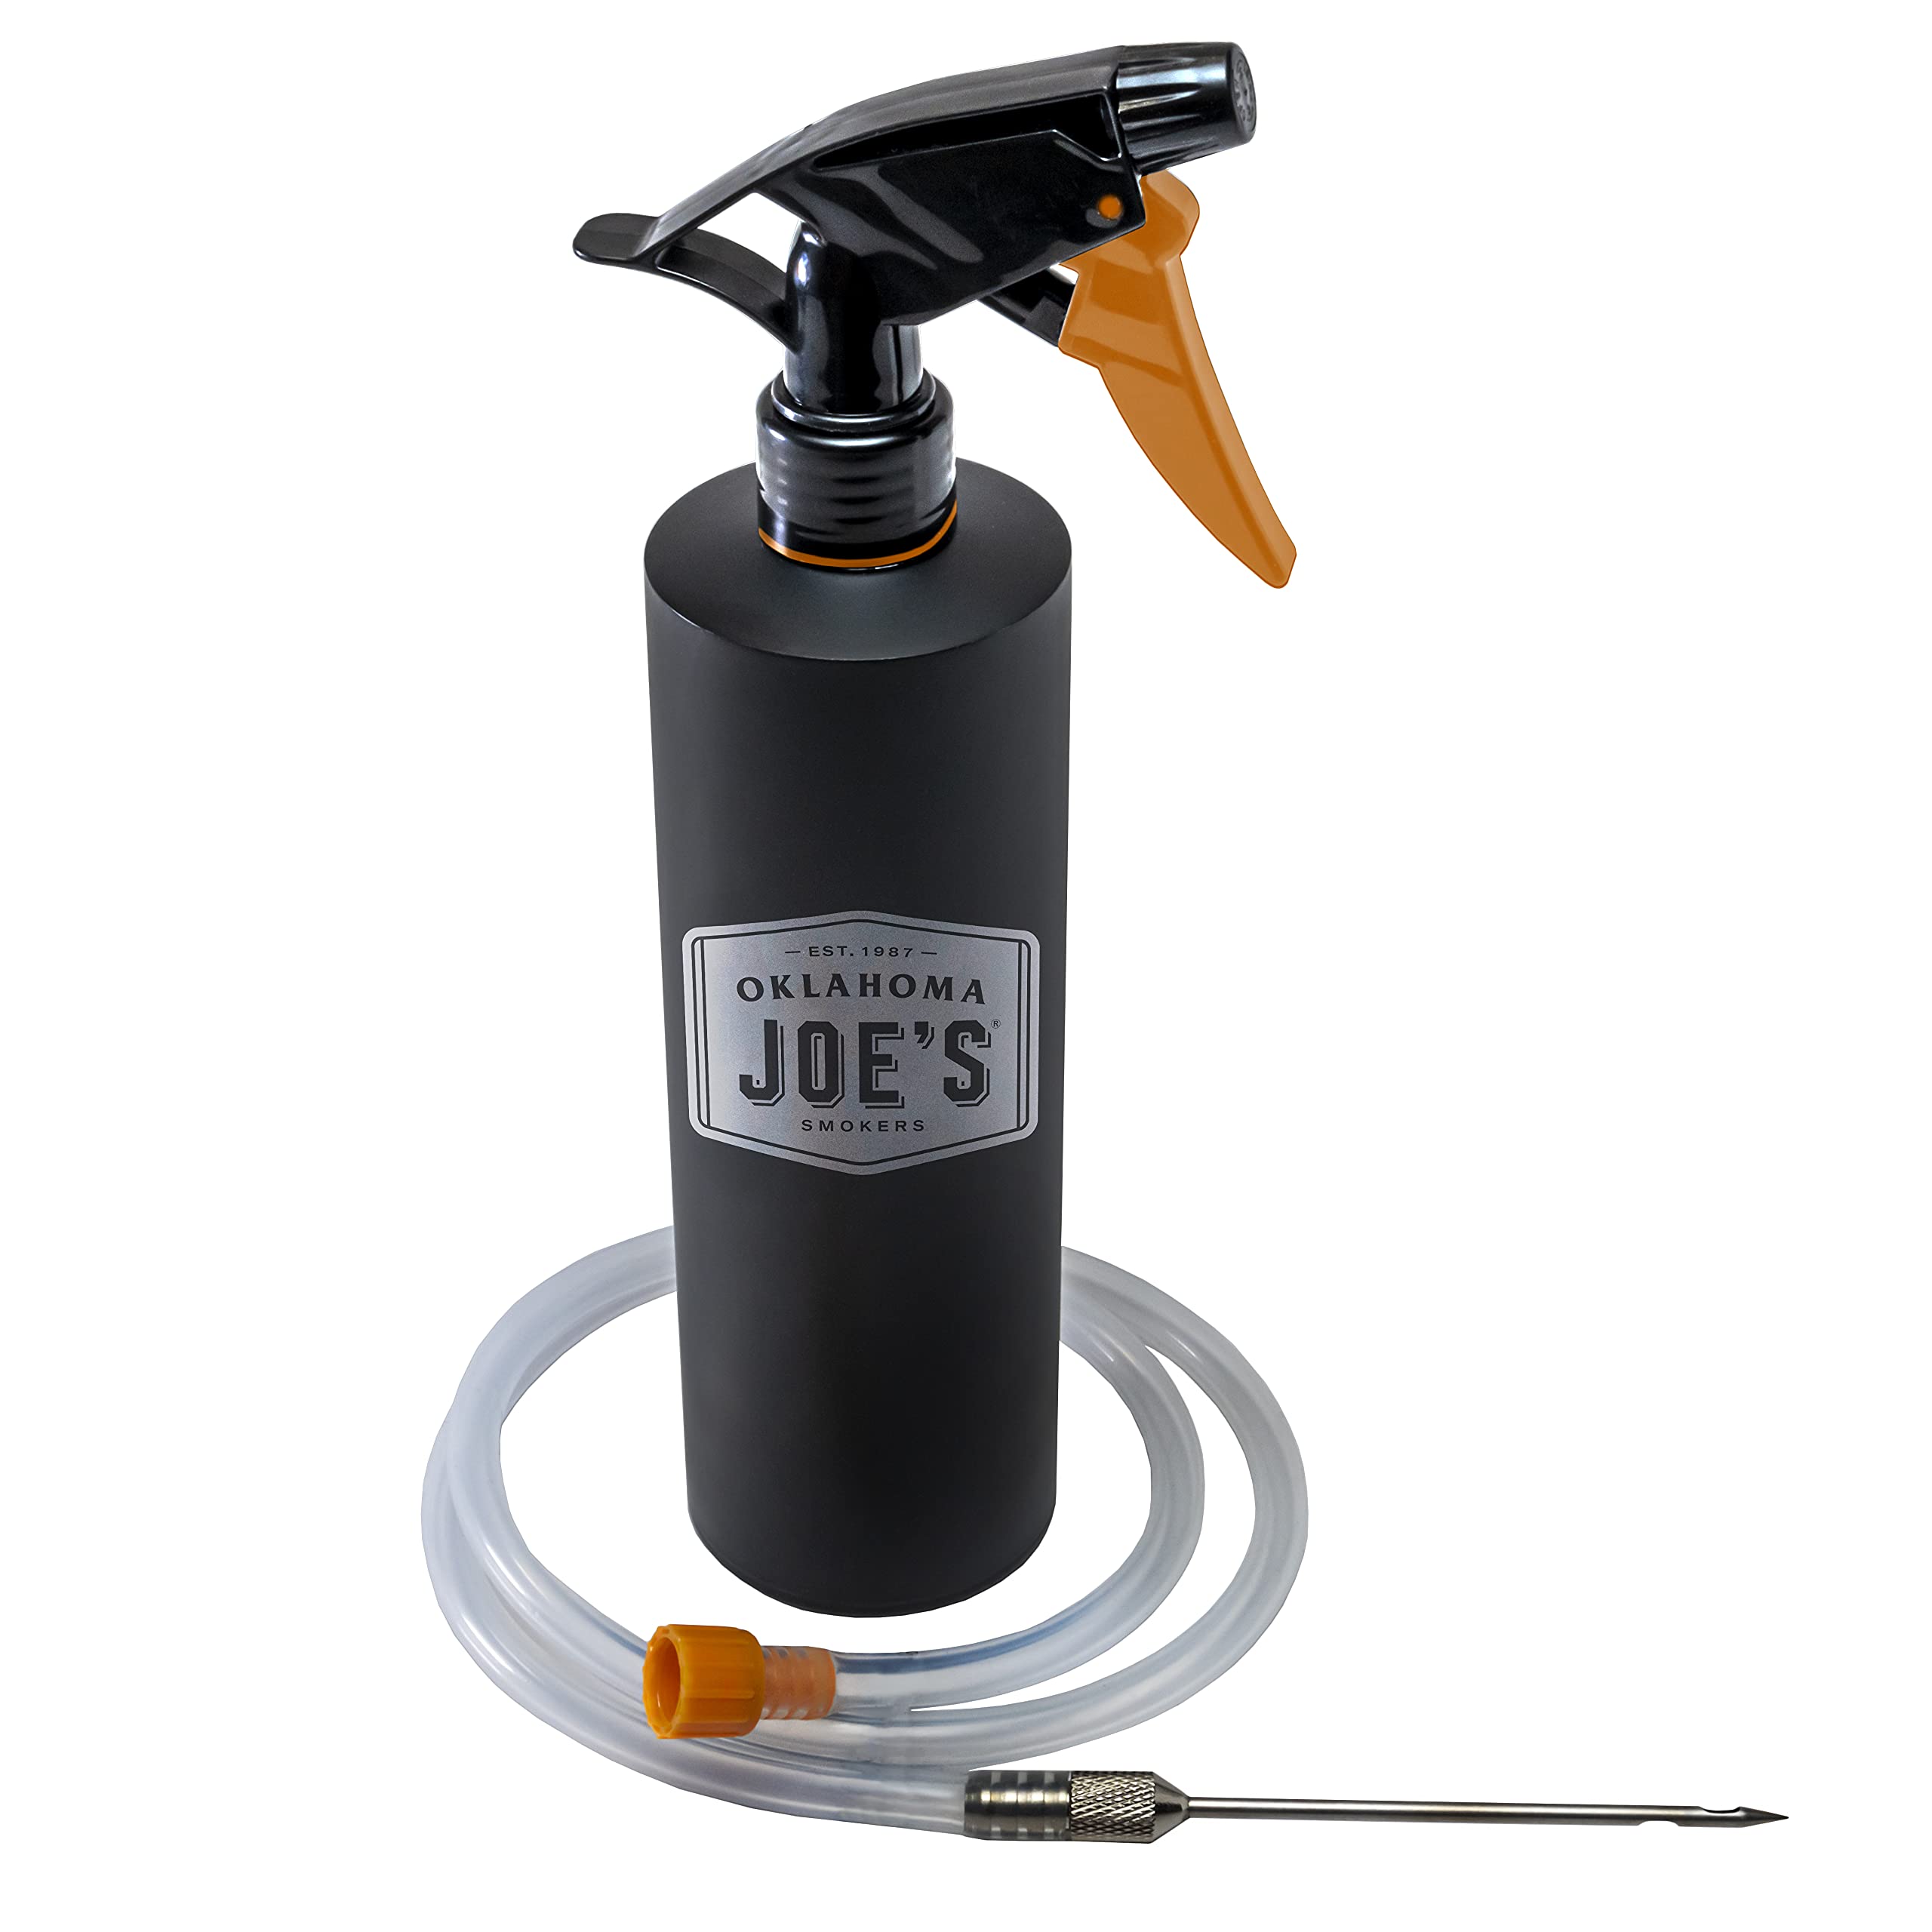 Oklahoma Joe's 2-in-1 Spray Bottle & Marinade Injector $10 + Free Shipping w/ Prime or on $35+